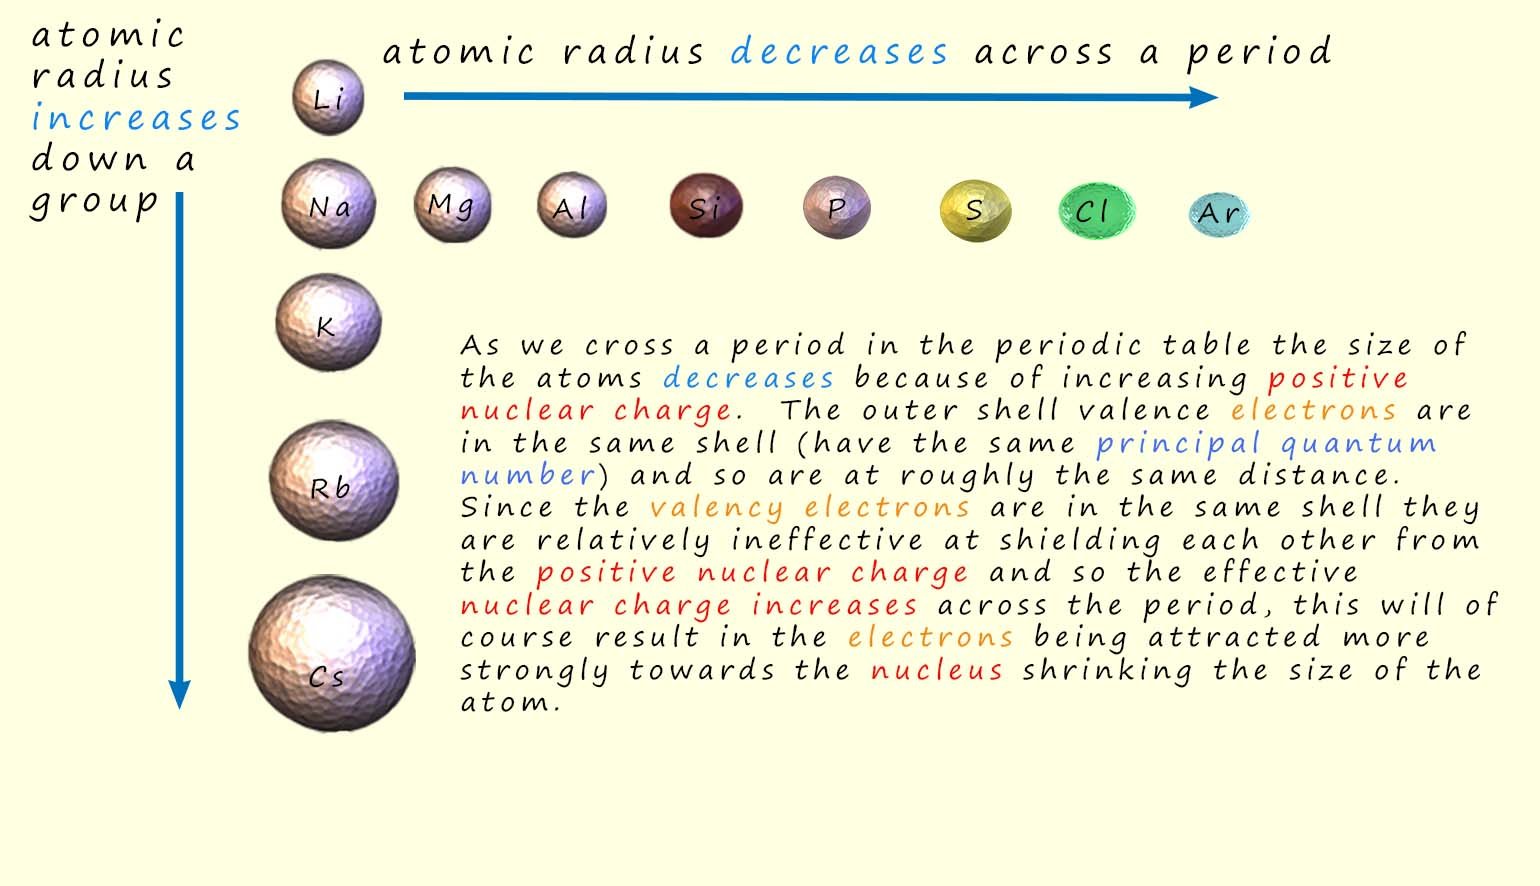 comparison of atomic radius of elements across a period in the periodic table